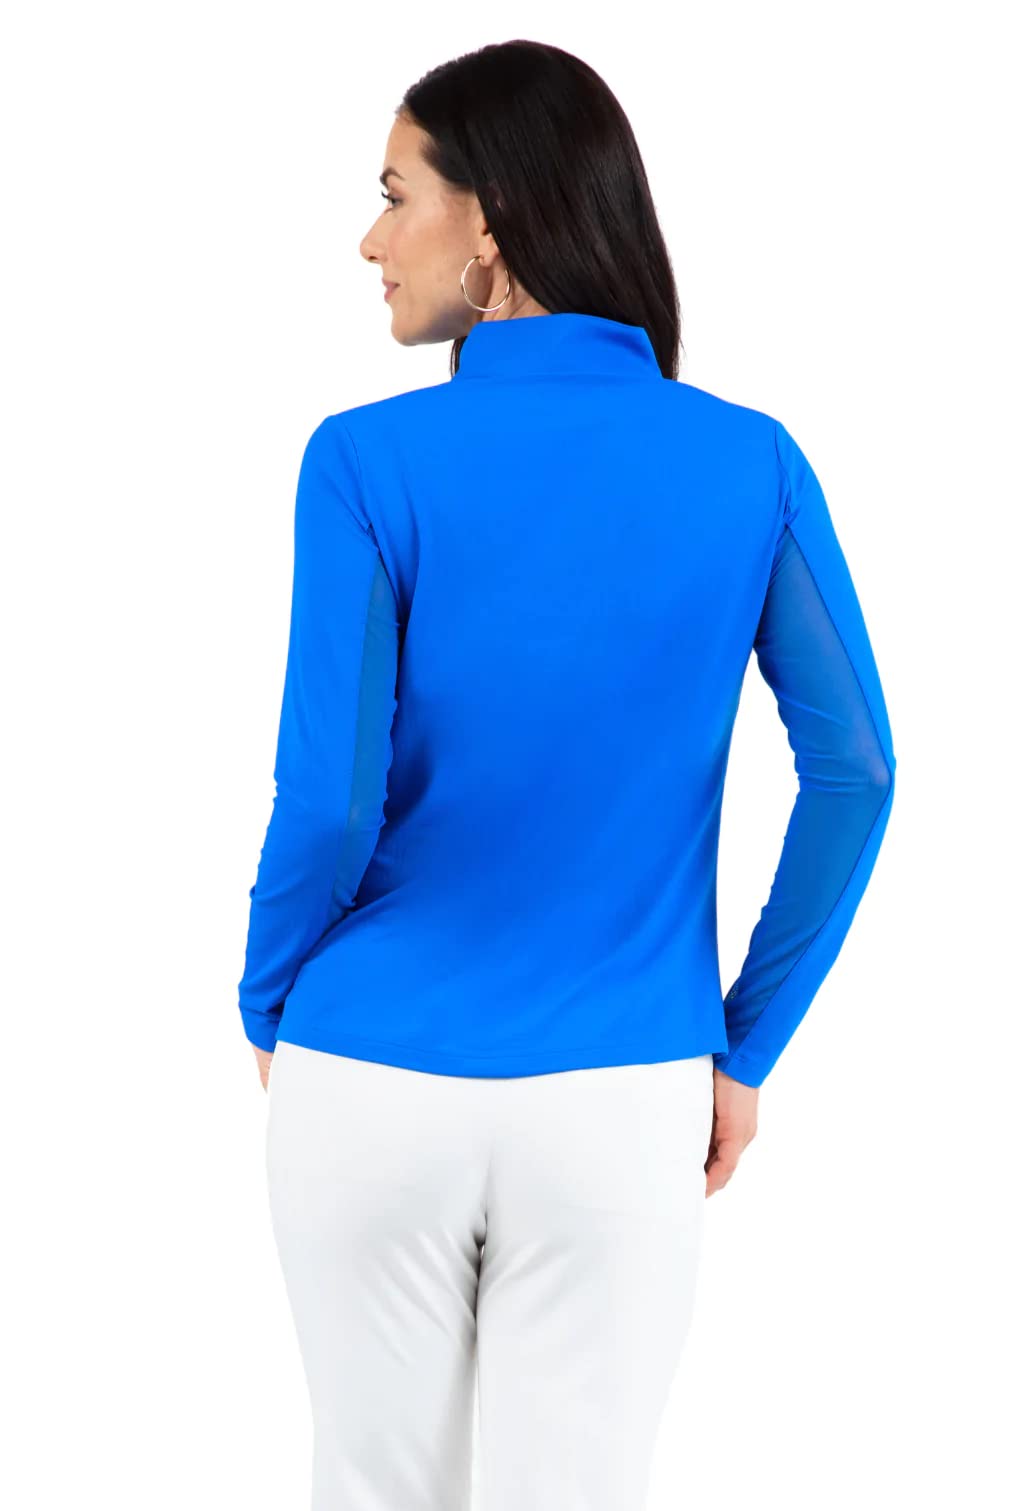 IBKUL Athleisure Wear Sun Protective UPF 50+ Icefil Cooling Tech Long Sleeve Mock Neck Top with Under Arm Mesh 80000